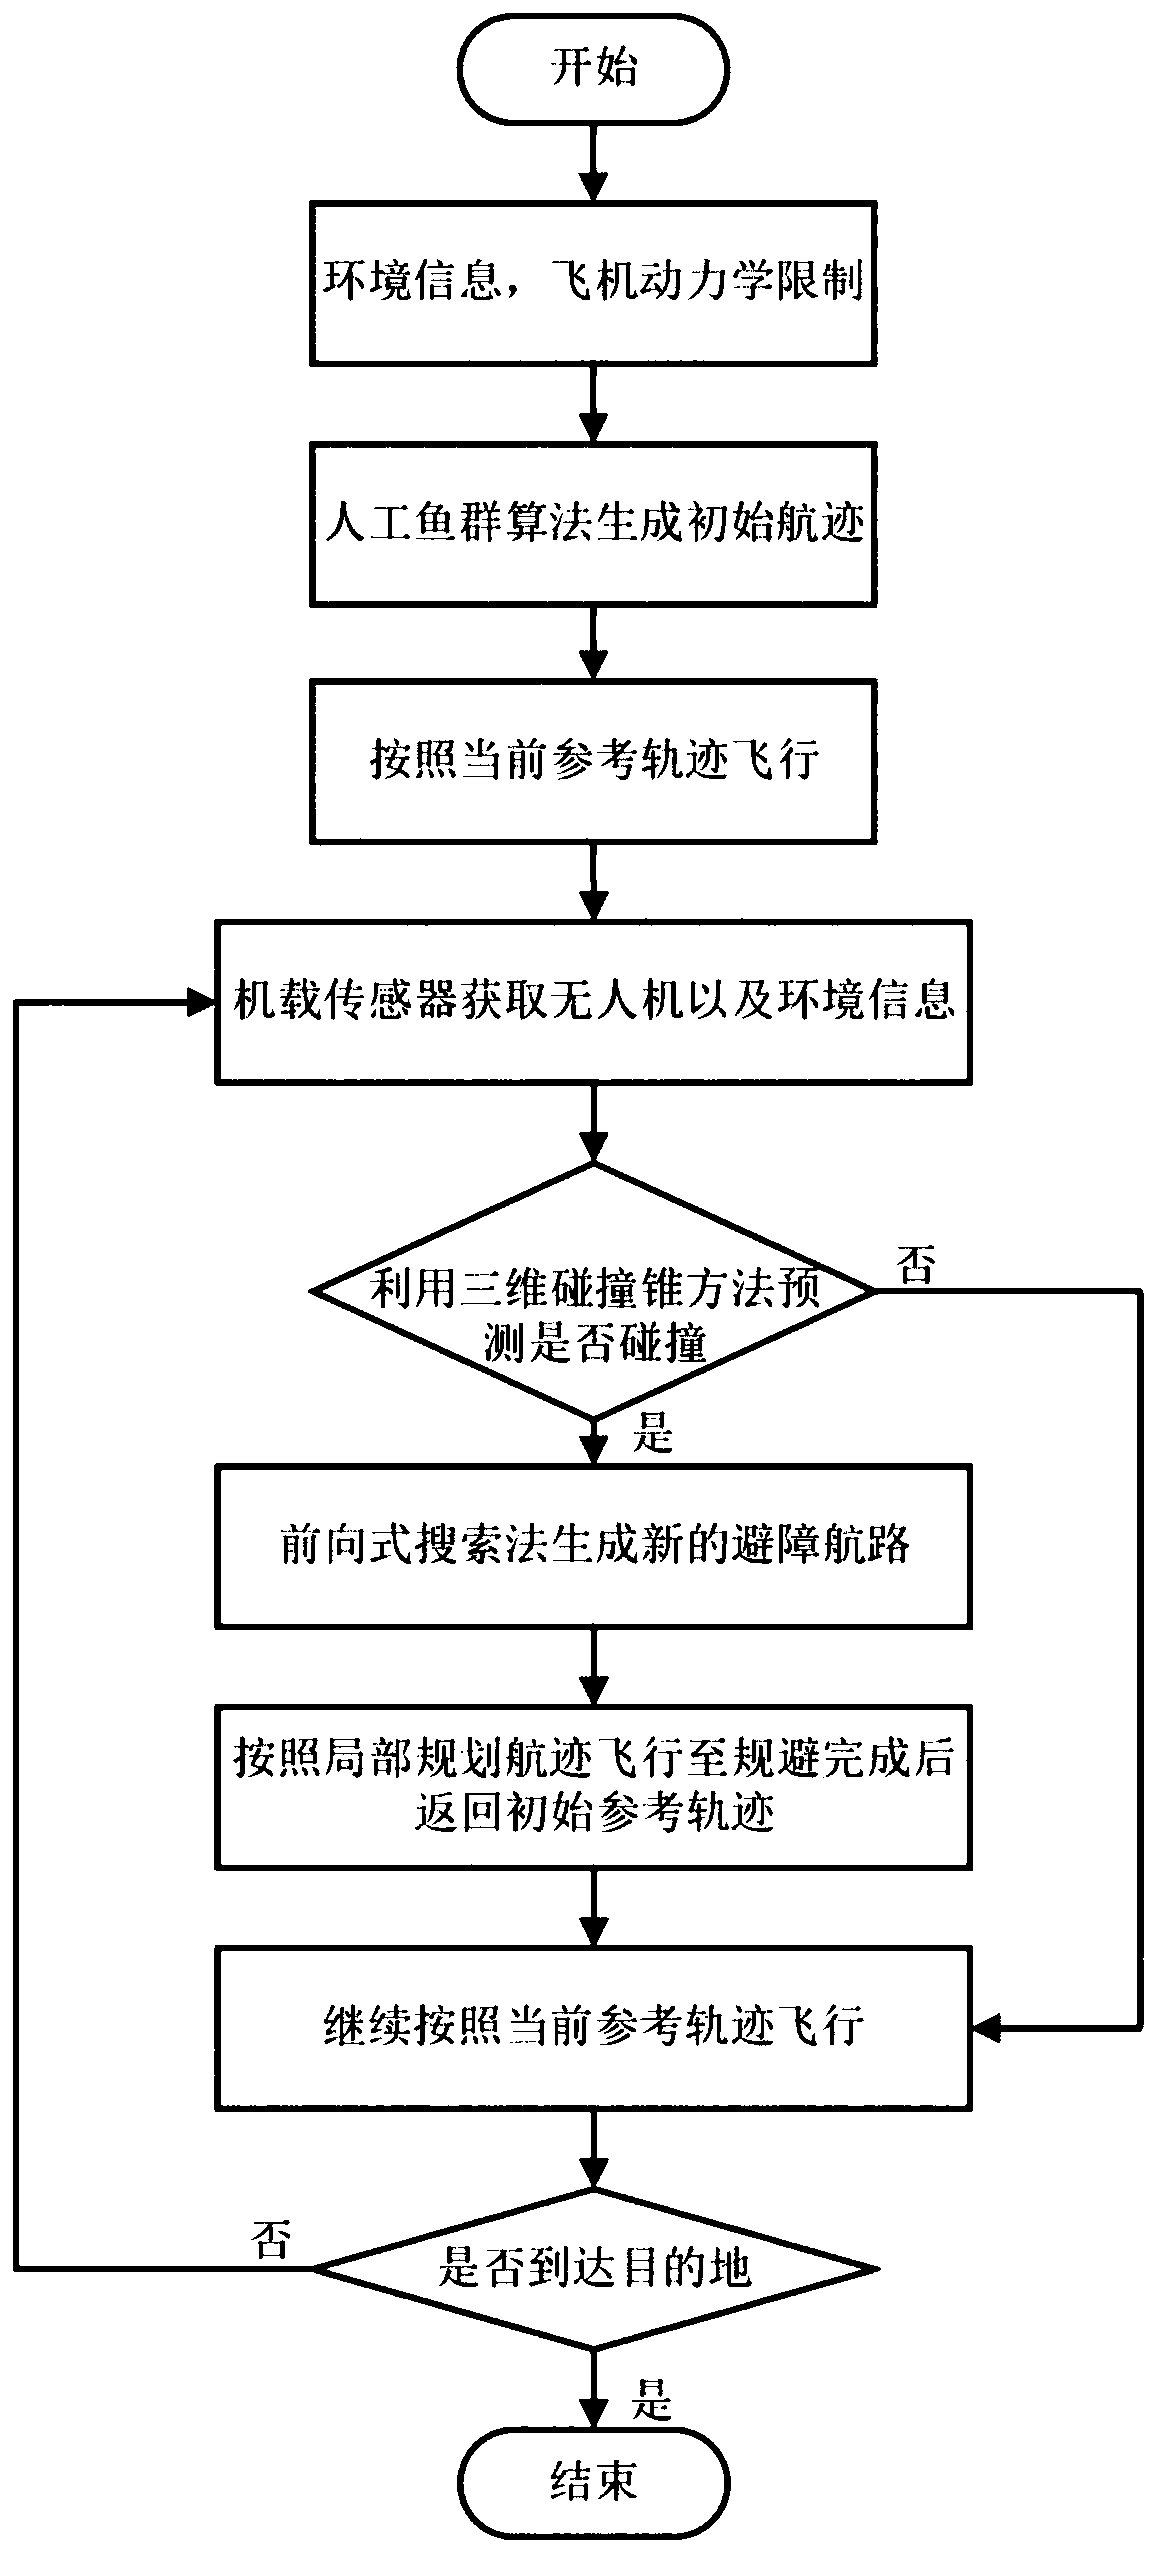 Double-layer path planning method for overcoming limitations ofcalculation and storage capacity of UAV (unmanned aerial vehicle)